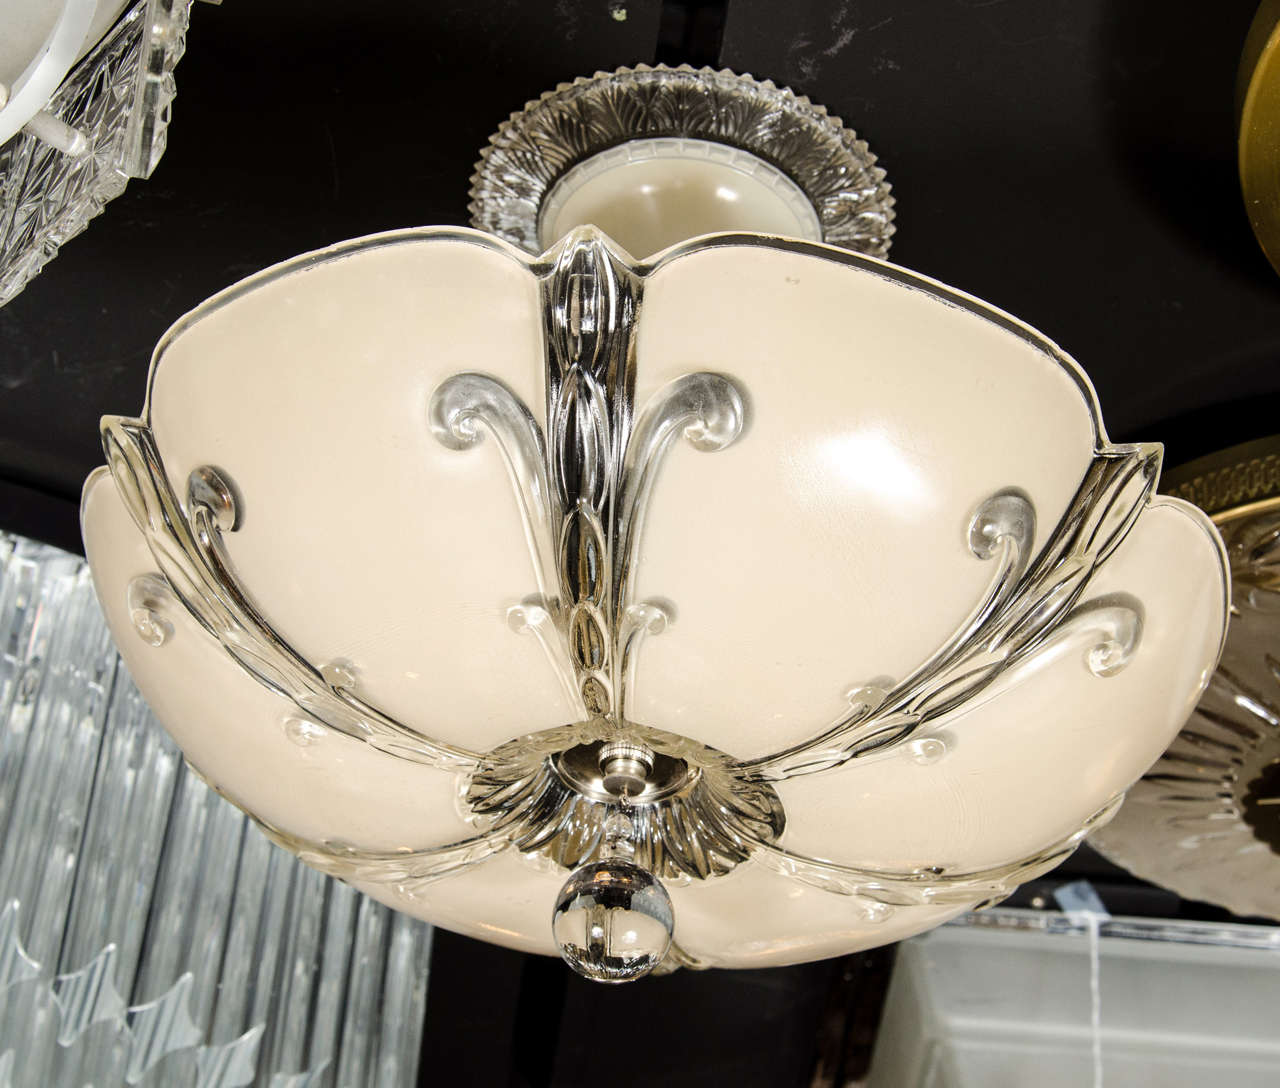 Art Deco molded and relief glass dome chandelier. The glass dome of this chandelier features a stylized fleur-de-lys design that spans out from its center point. It is capped by a glass ball drop in the center. The dome is then suspended by its